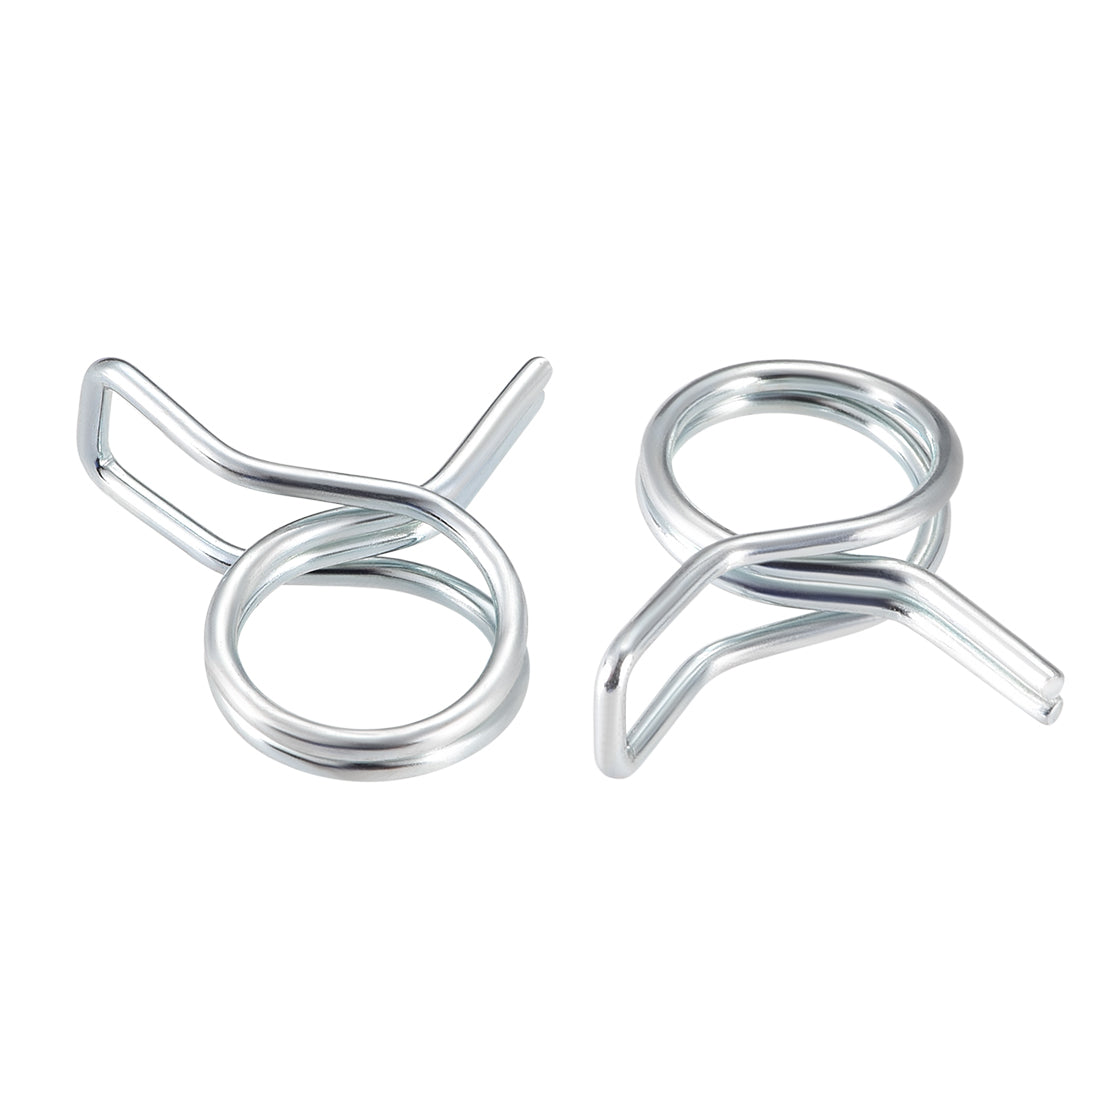 Uxcell Uxcell Double Wire Spring Hose Clamp 7mm Fuel Line Tube Spring Clips Zinc Plated 10Pcs